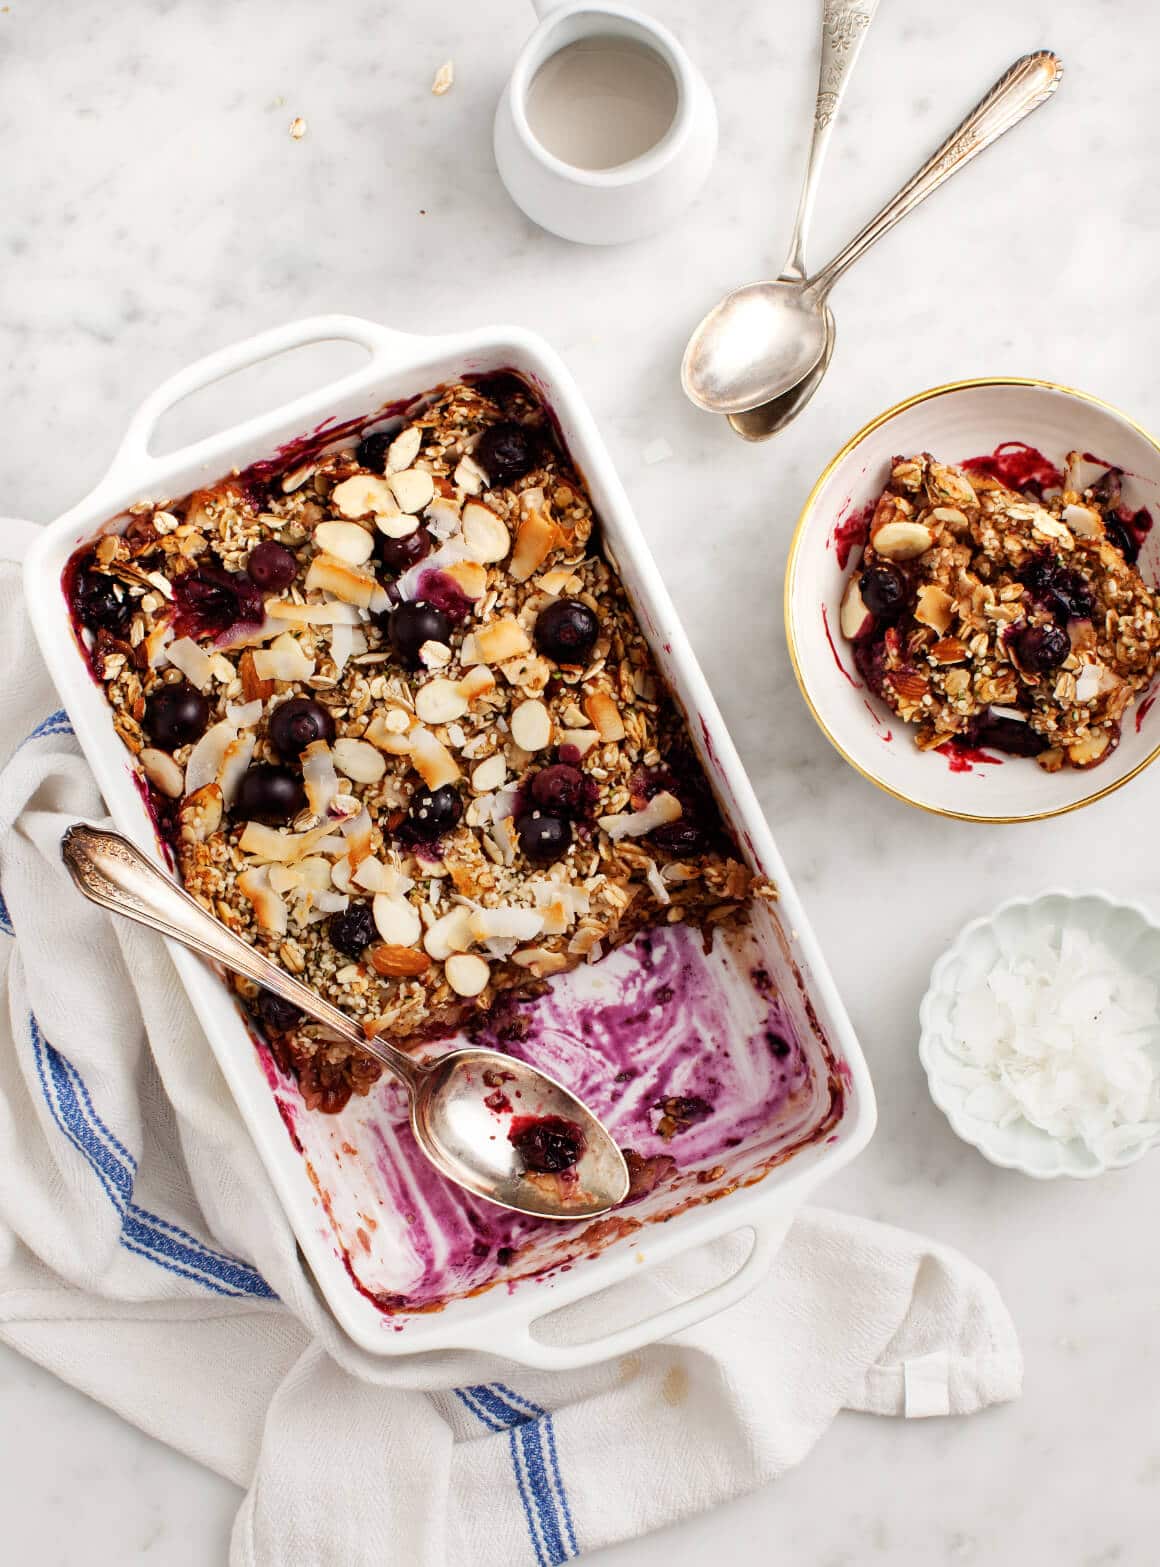 Blueberry Coconut Baked Oatmeal from loveandlemons.com on foodiecrush.com